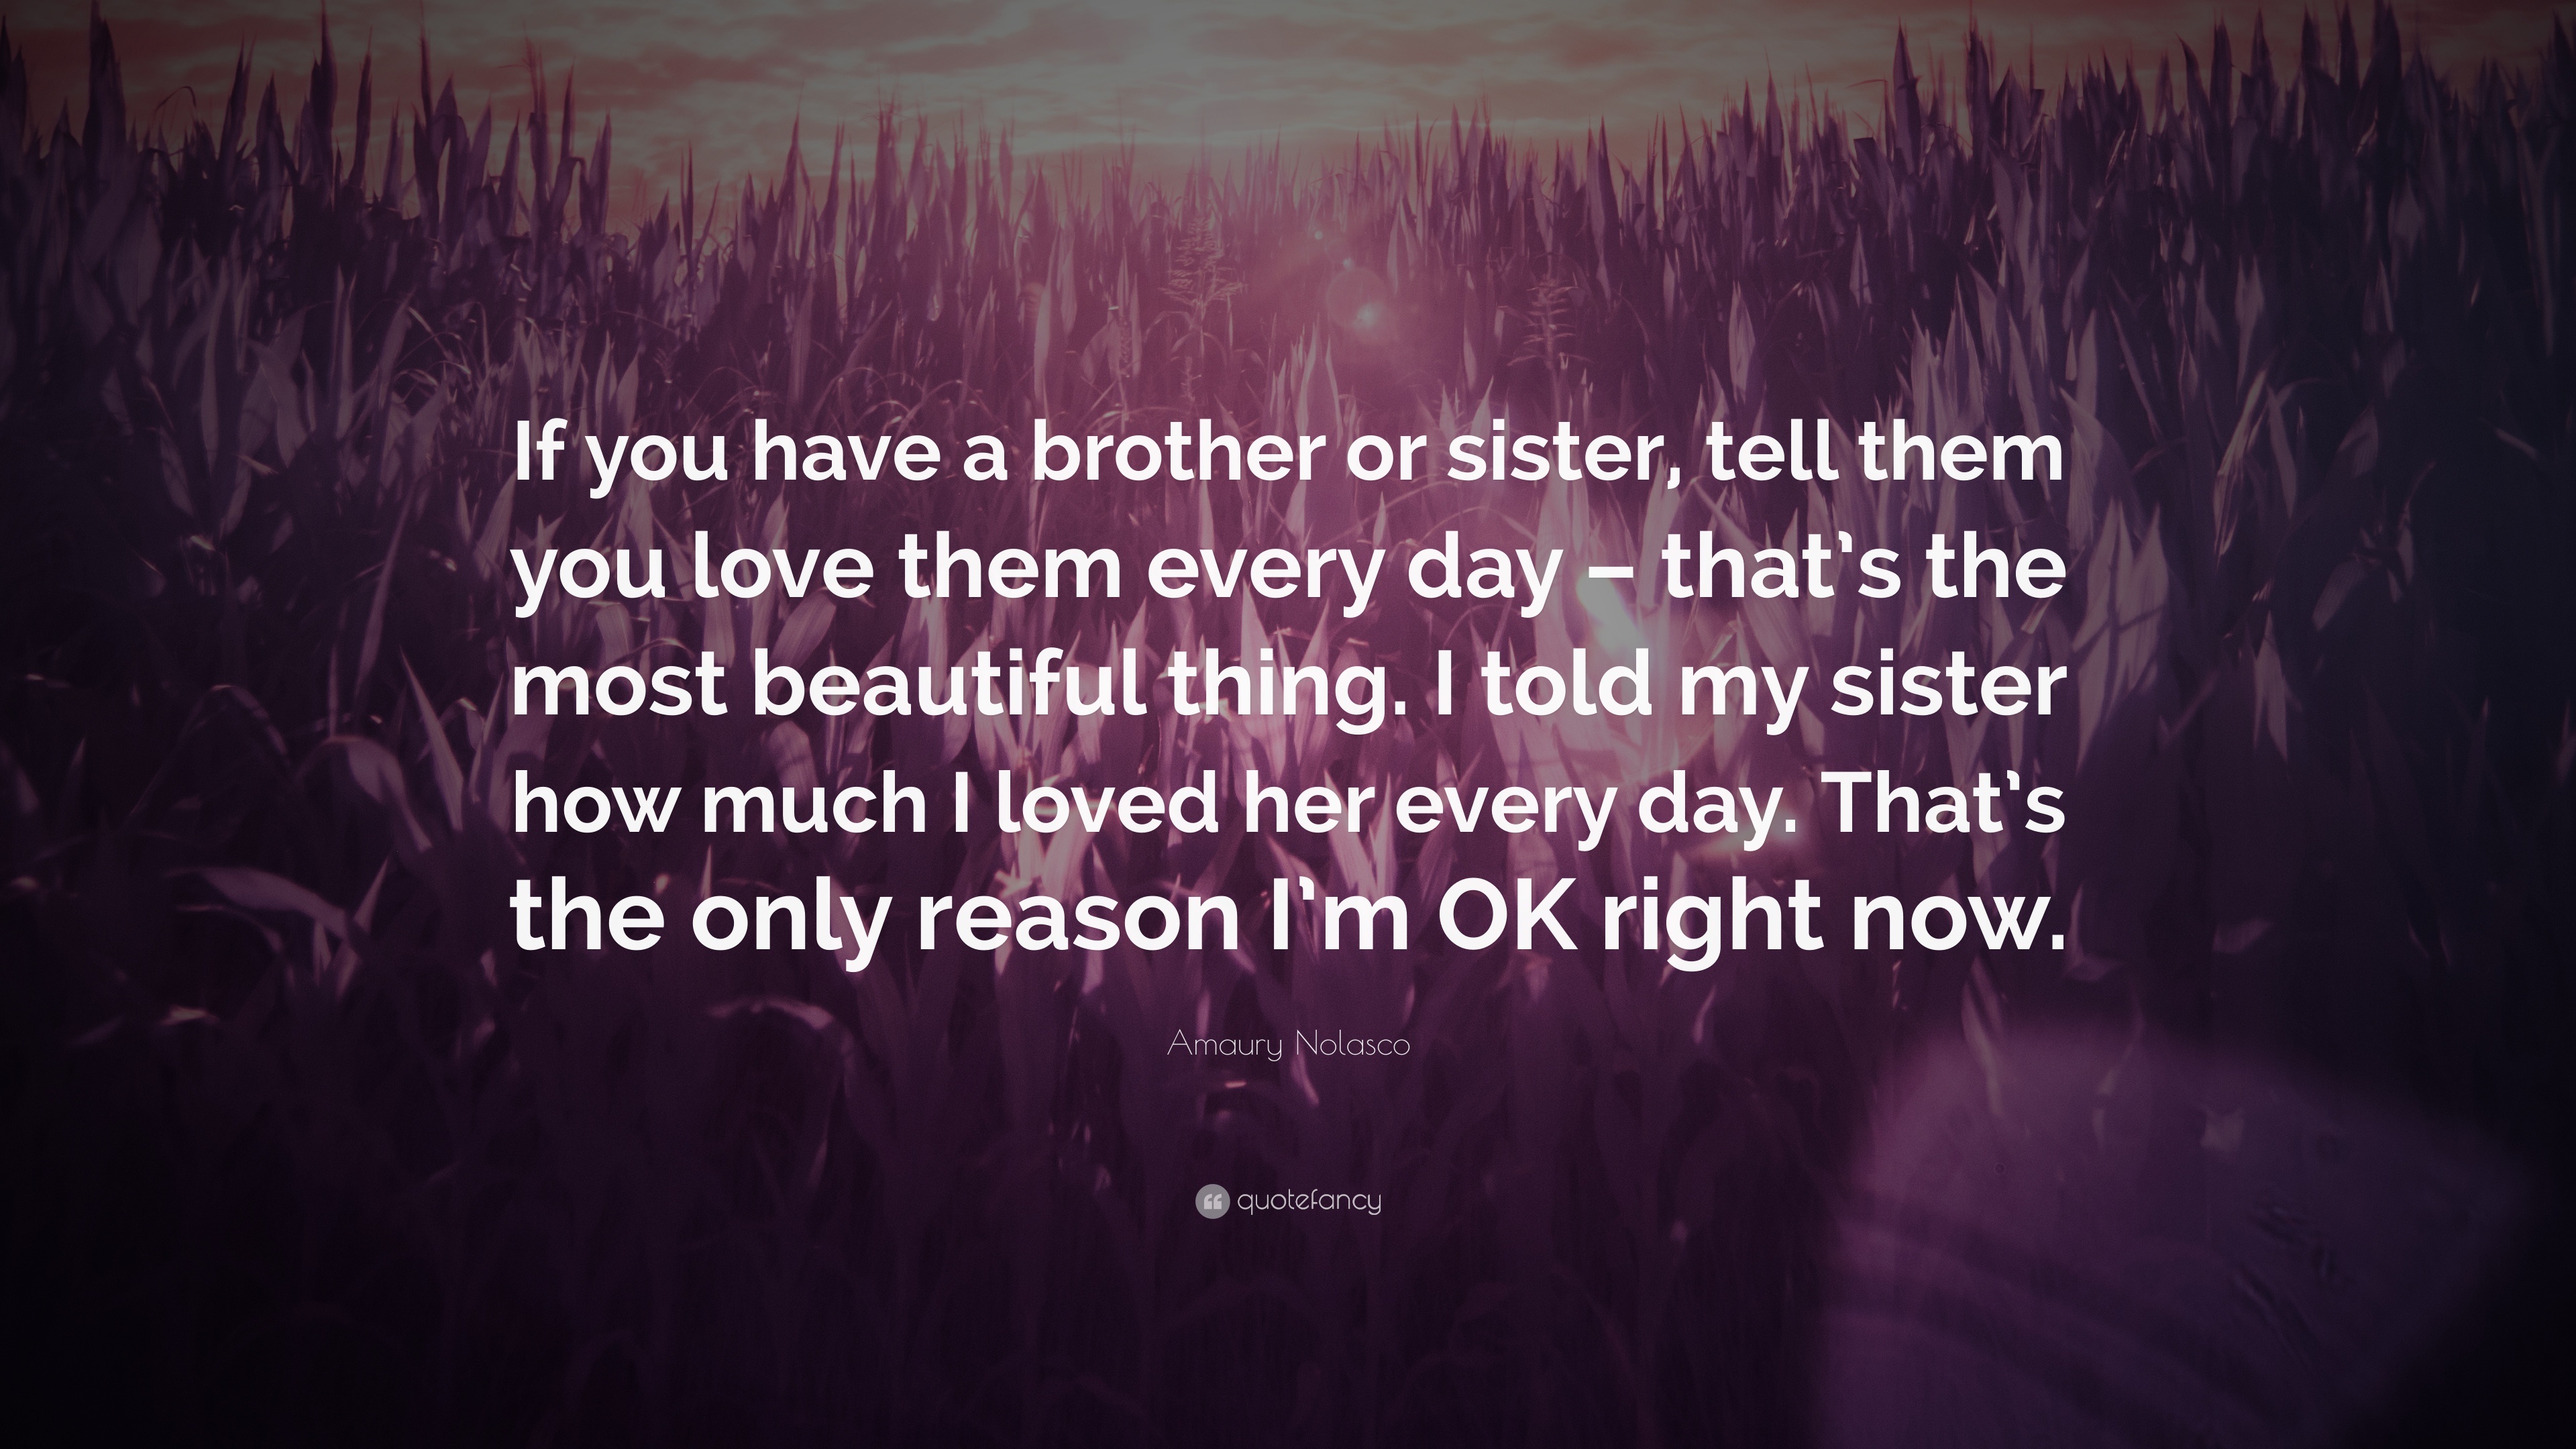 Amaury Nolasco Quote: “If you have a brother or sister, tell them you love them every day